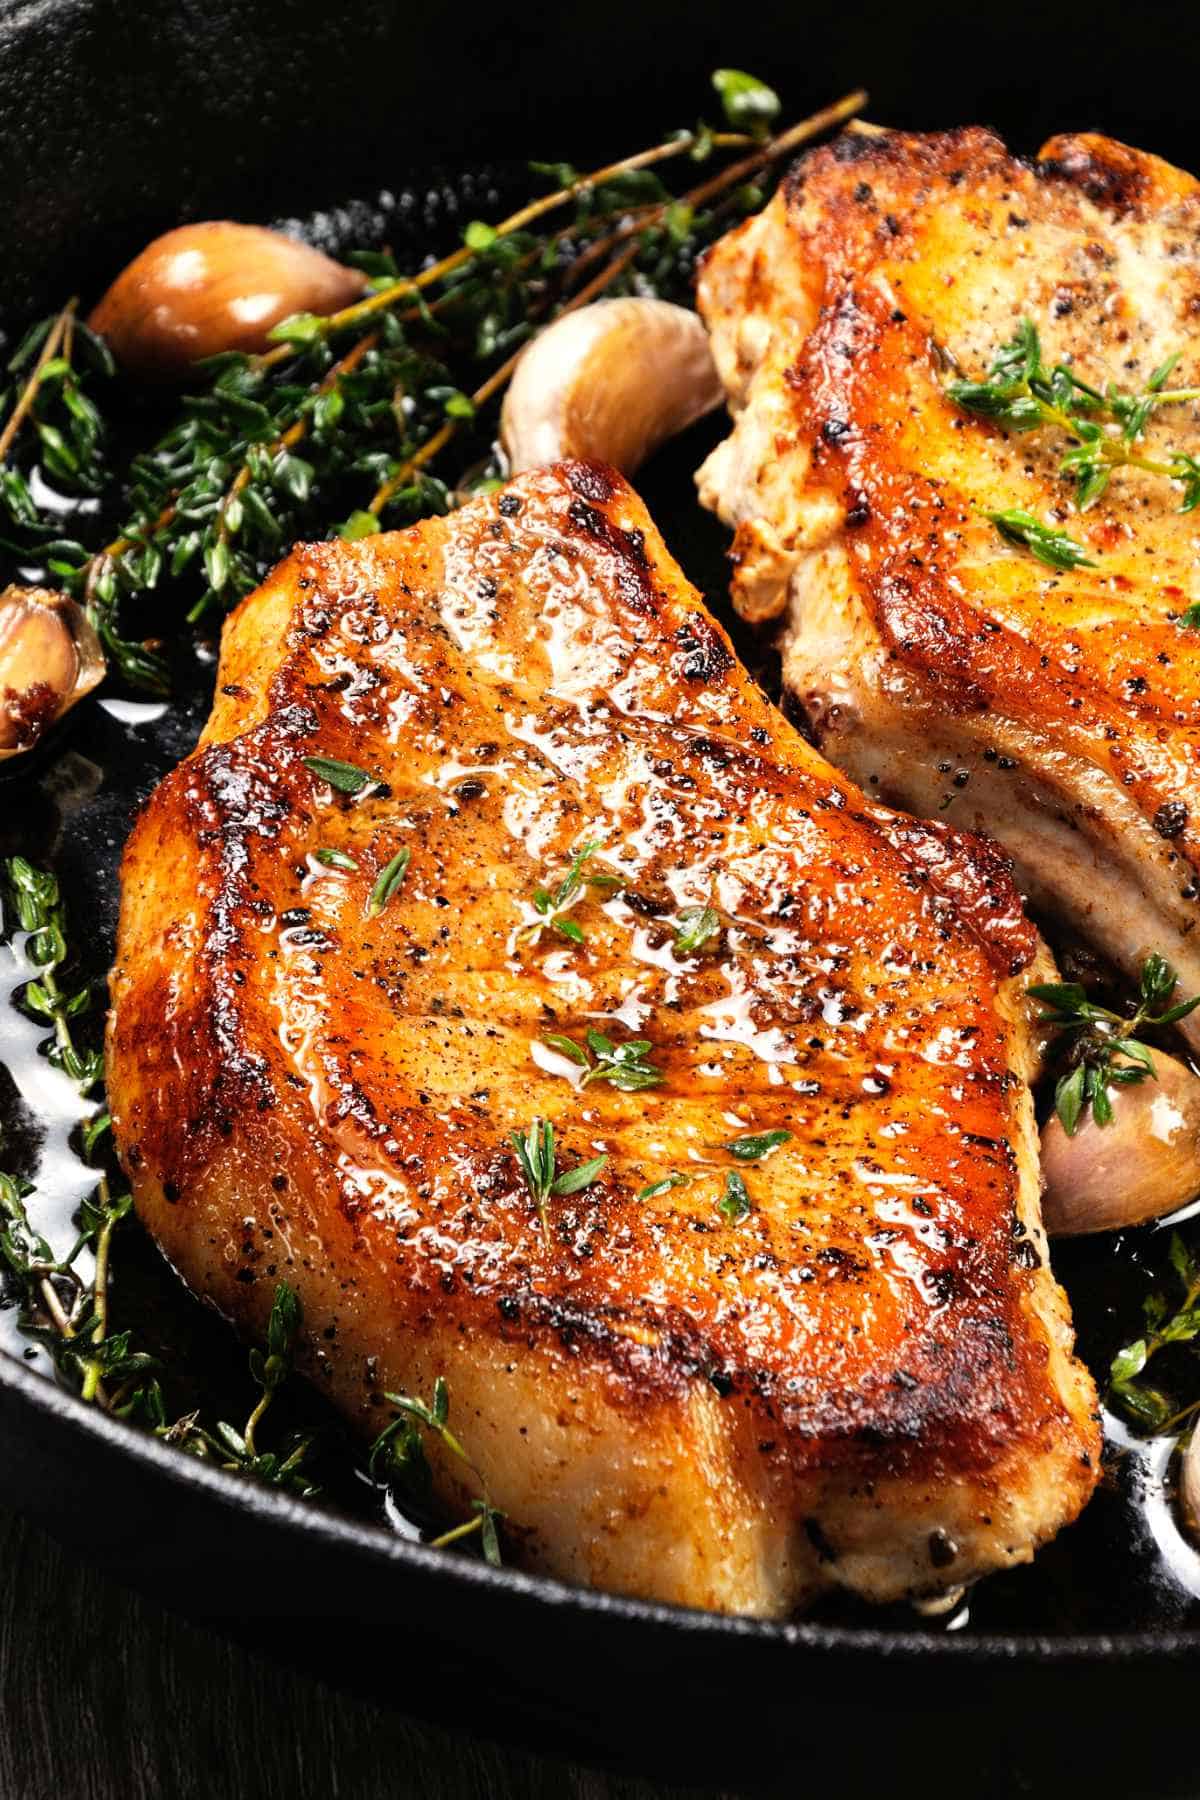 Juicy, pan grilled pork chops on a bone in oil with garlic and herbs in a frying pan.